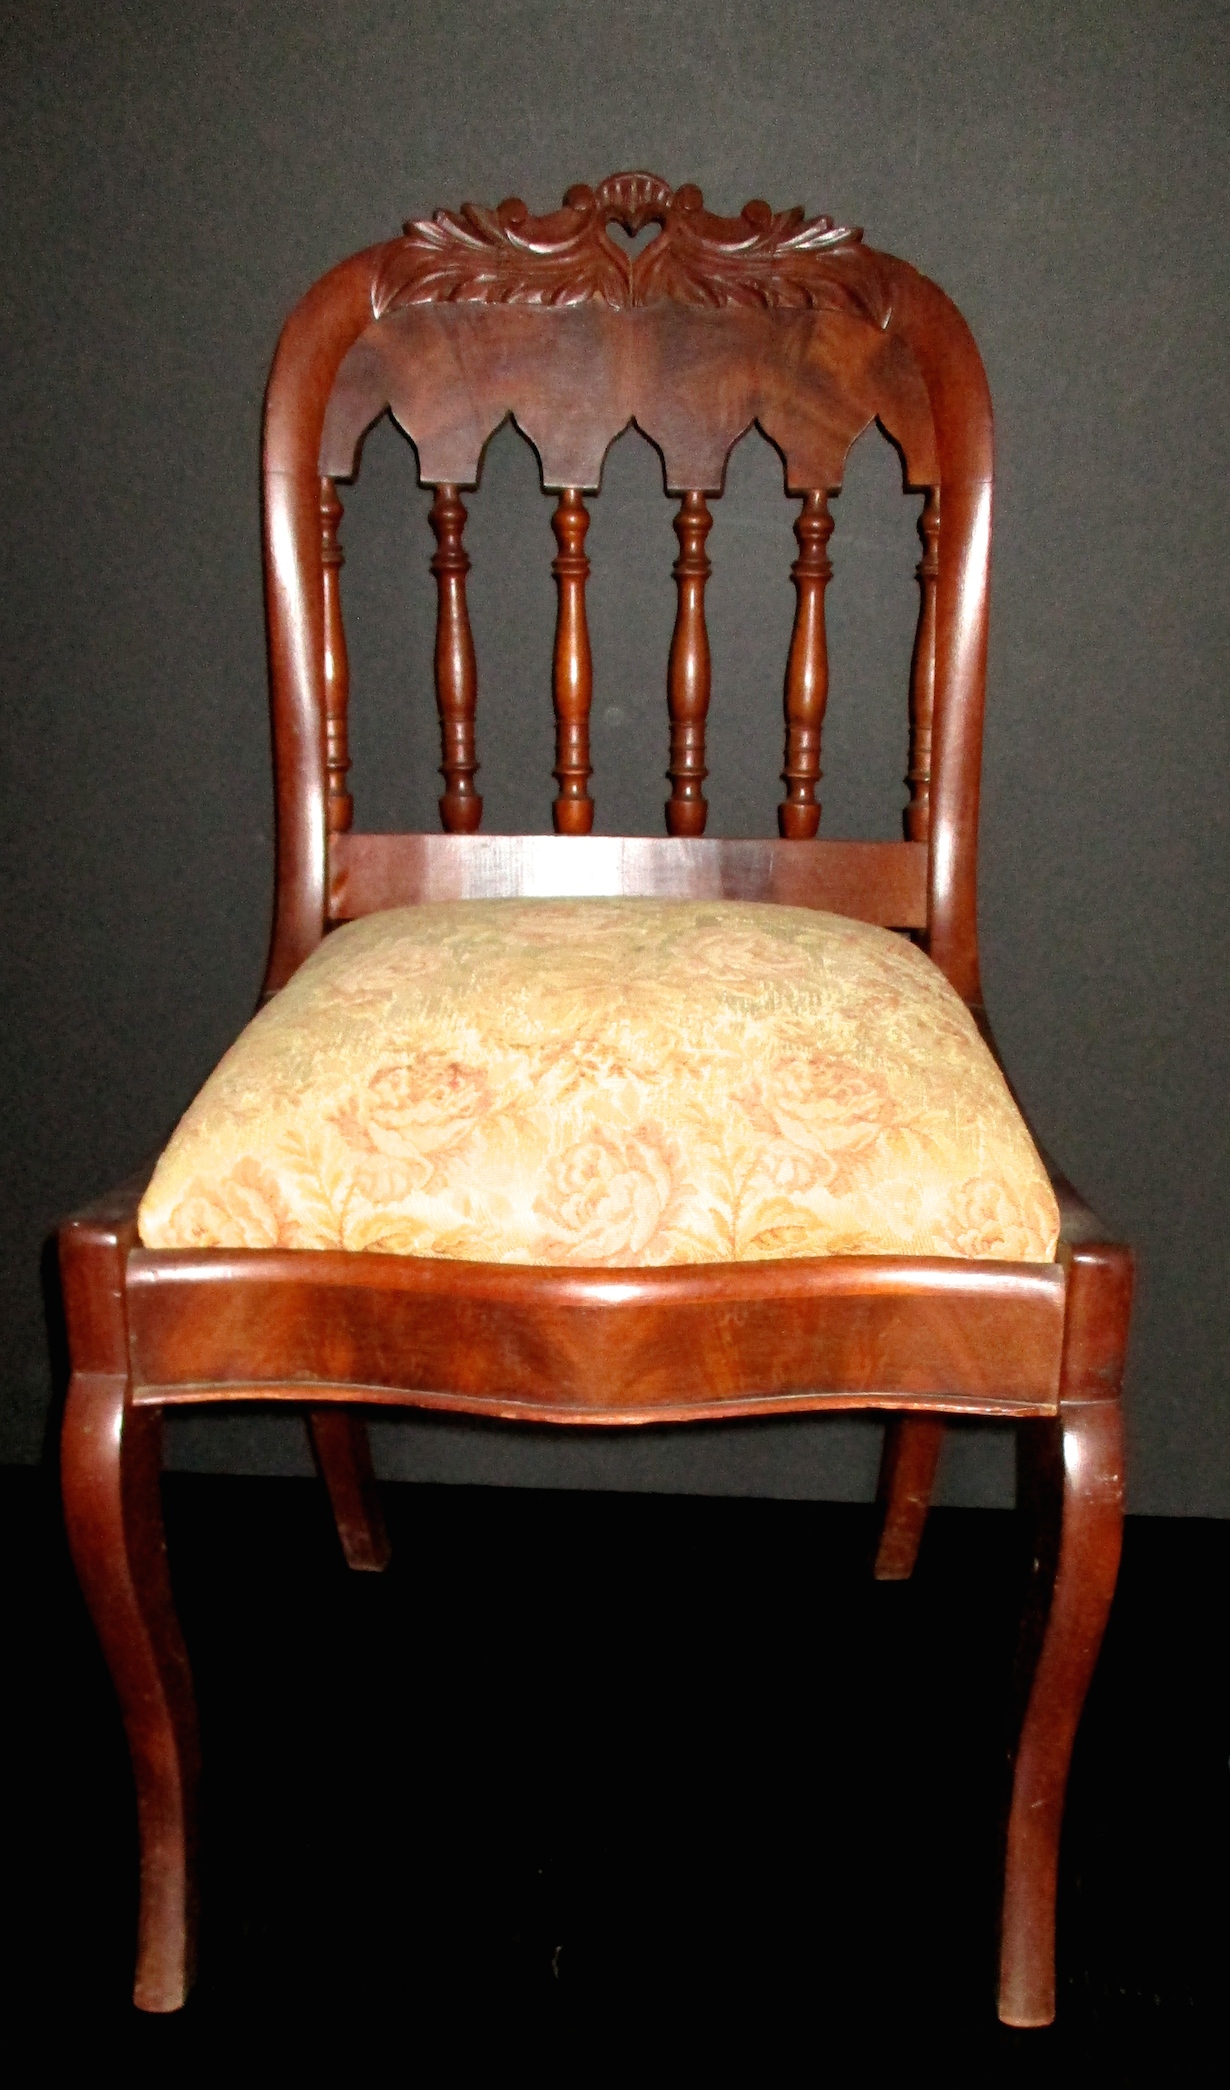 1 of 4 19th Century Mahogany Slip Seat Chairs (We can restore to customer's specifications)